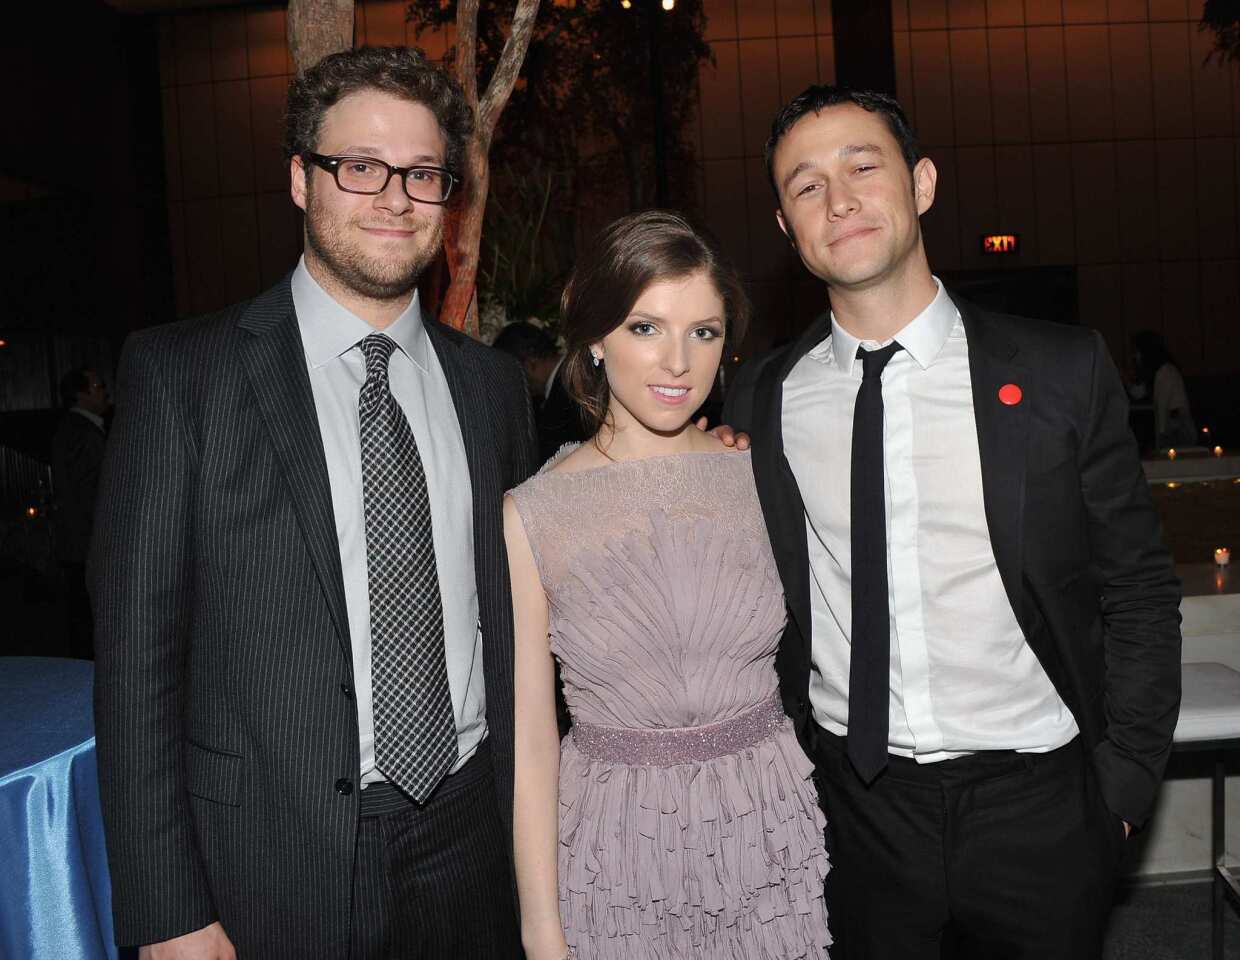 The stars of "50/50" gathered in New York on Monday to celebrate the film's Sept. 30 opening. The dramedy stars Joseph Gordon-Levitt, right, as a twentysomething named Adam who is diagnosed with cancer. Seth Rogen, left, plays his best bud, Kyle, while Anna Kendrick, center, portrays his therapist Katherine.